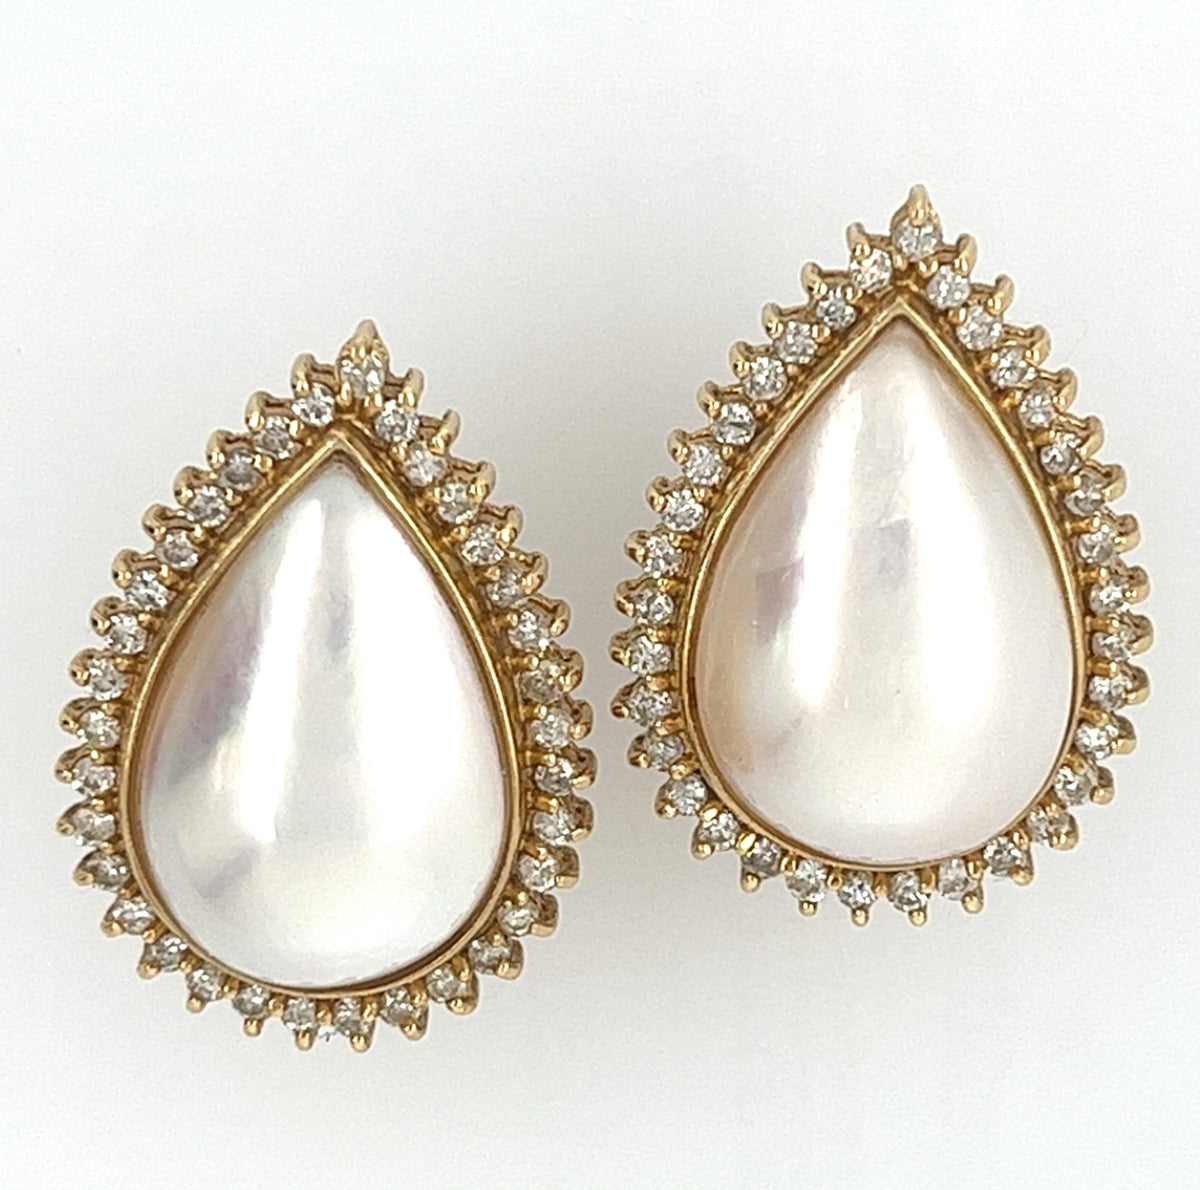 14 KT YELLOW GOLD FANCY LADIES DIAMOND AND PEARL EARRINGS